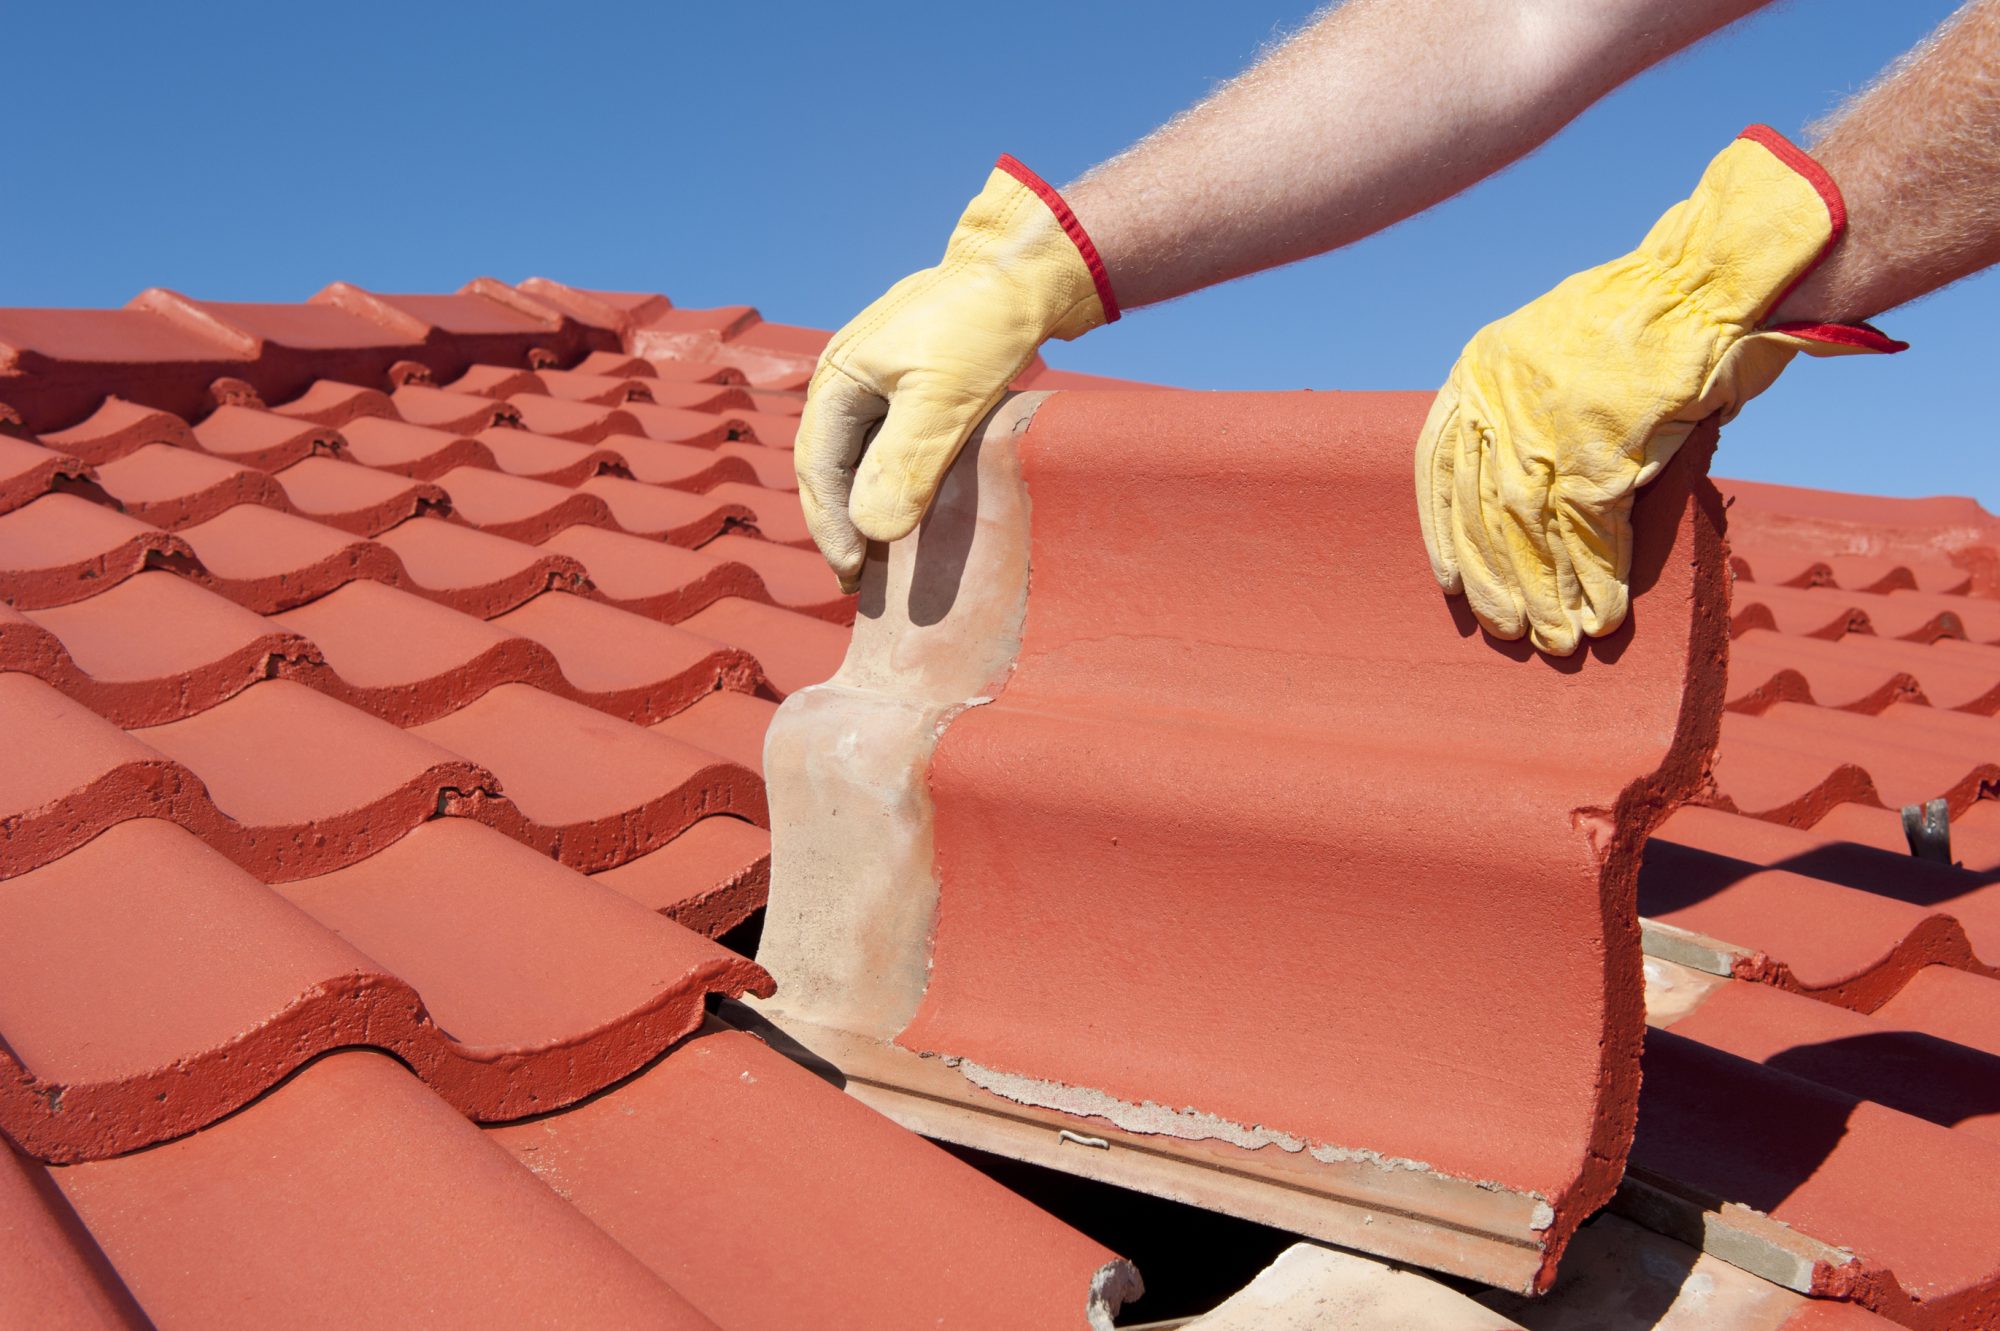 Roof repairs, worker with yellow gloves replacing red tiles or shingles on house with blue sky as background and copy space.